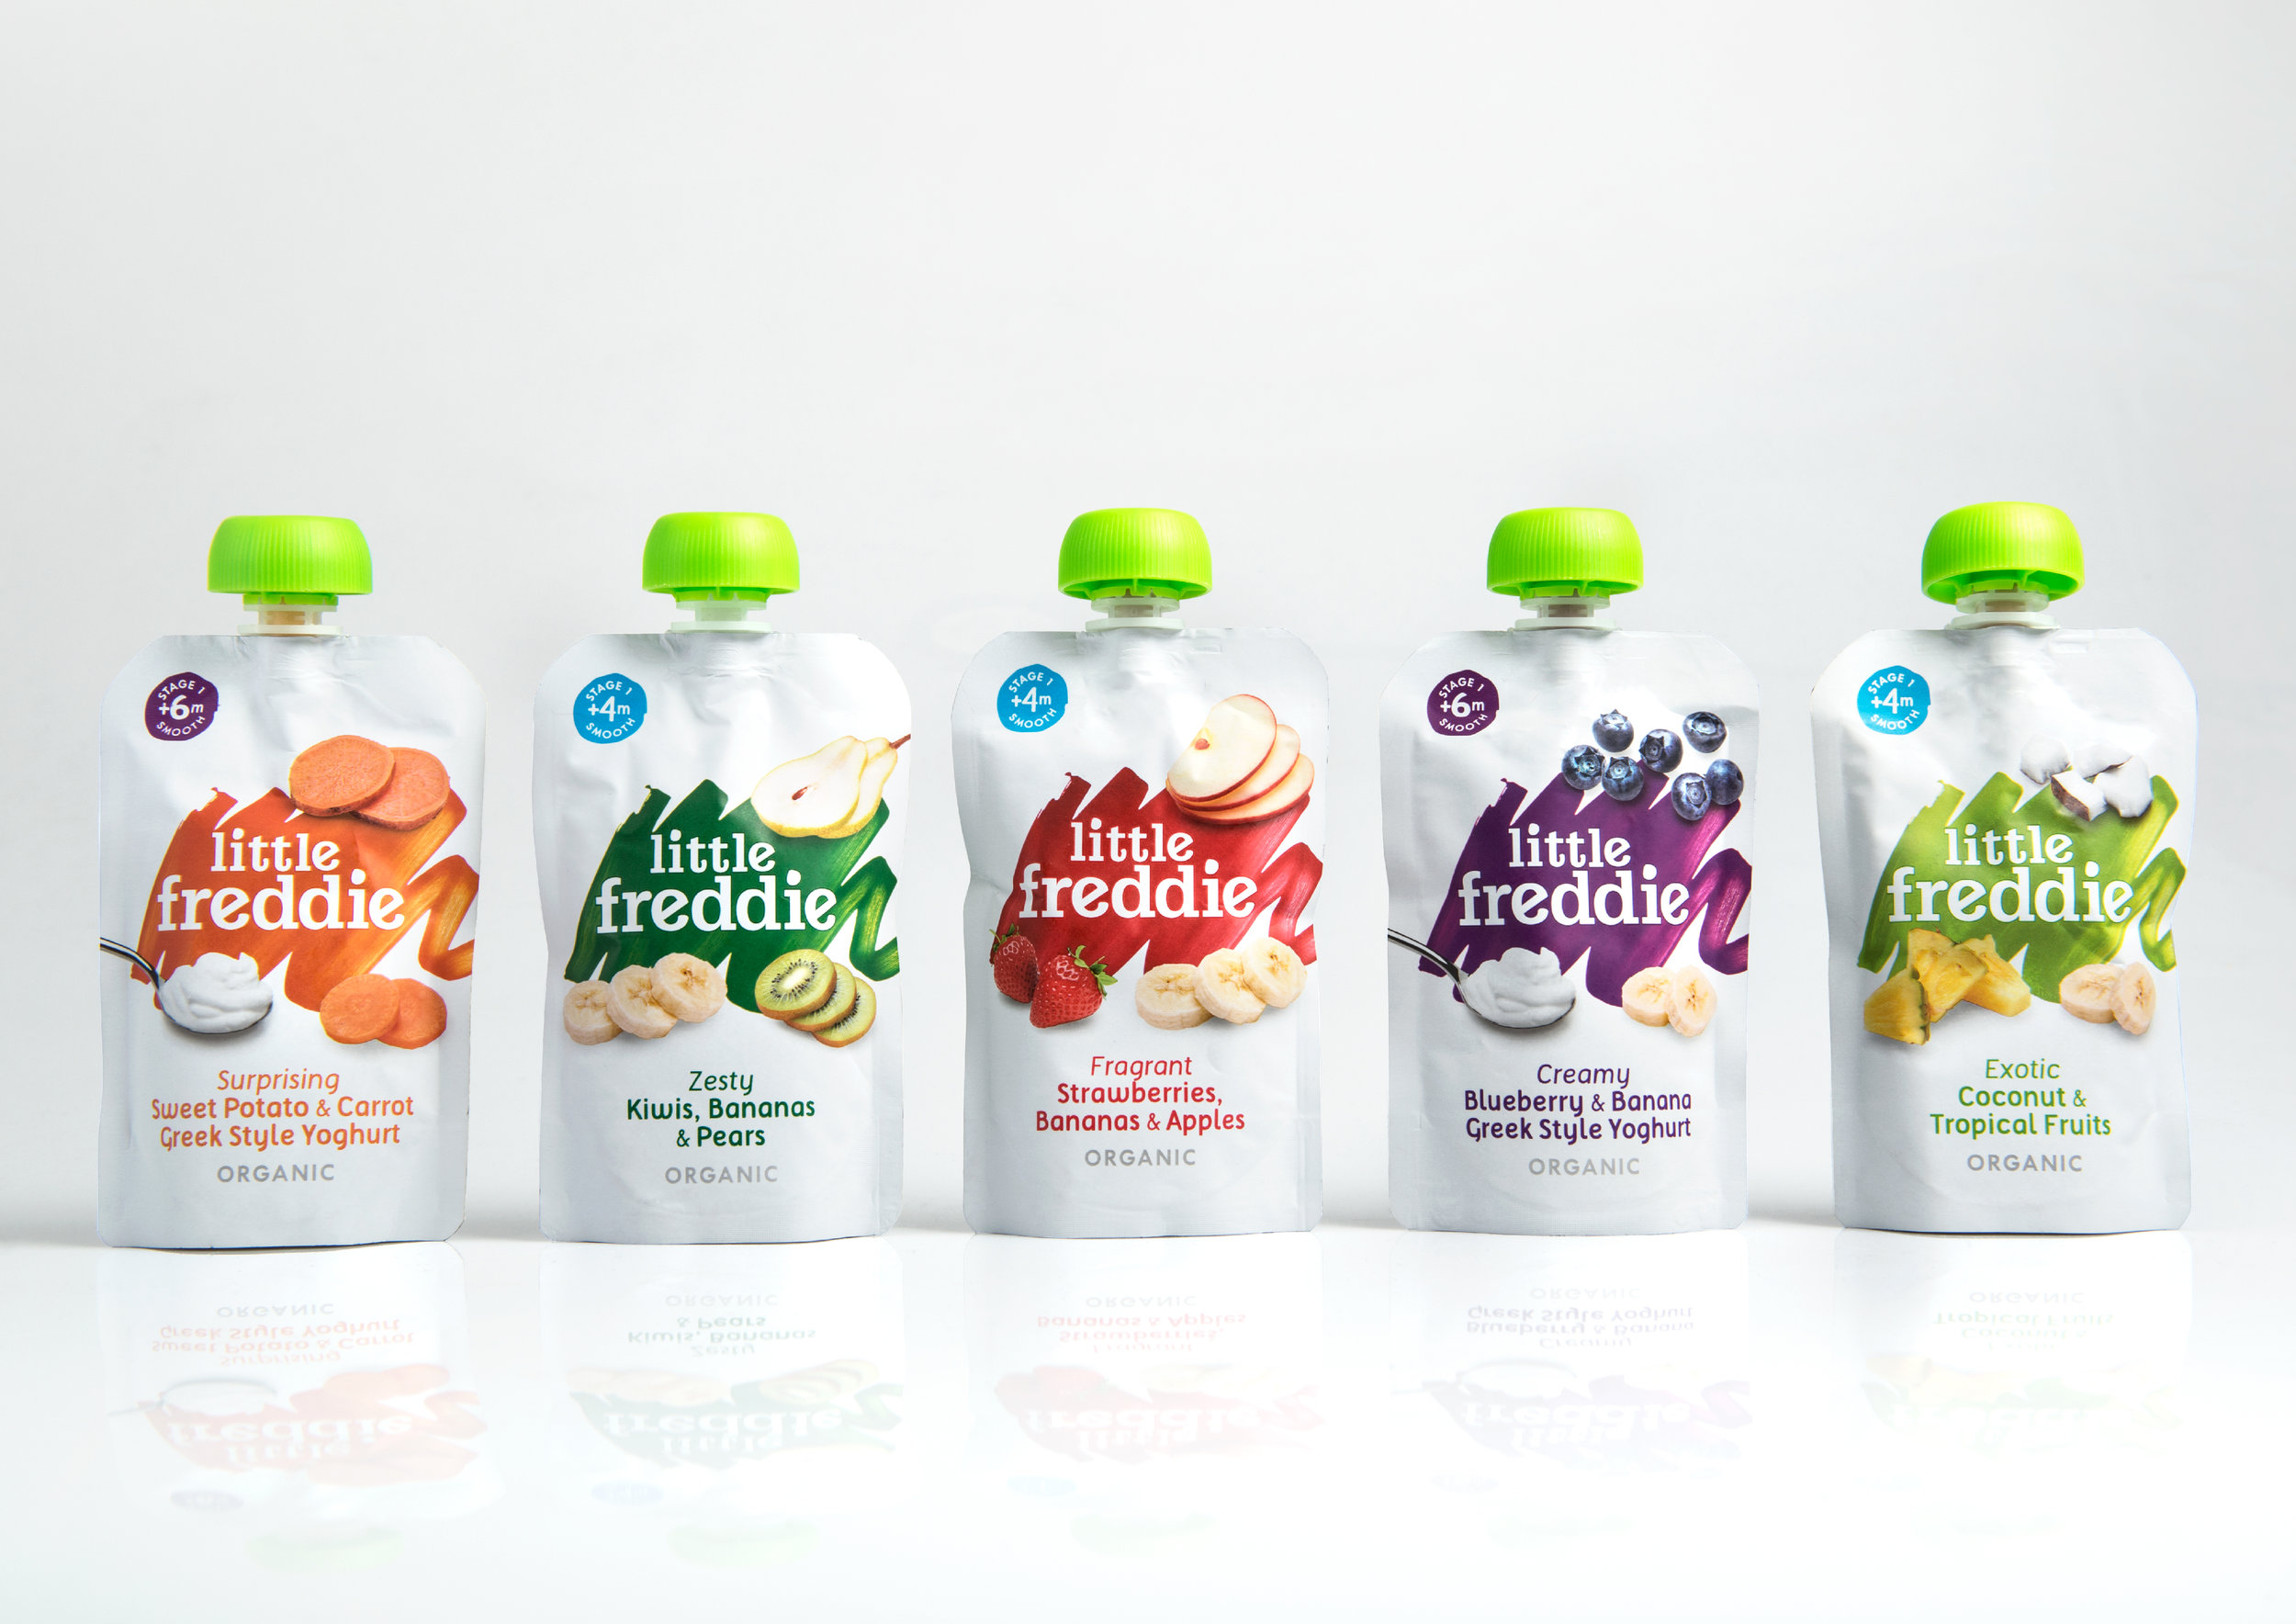 Rebranding and Packaging Design a Range of Baby Food to Disrupt the Category